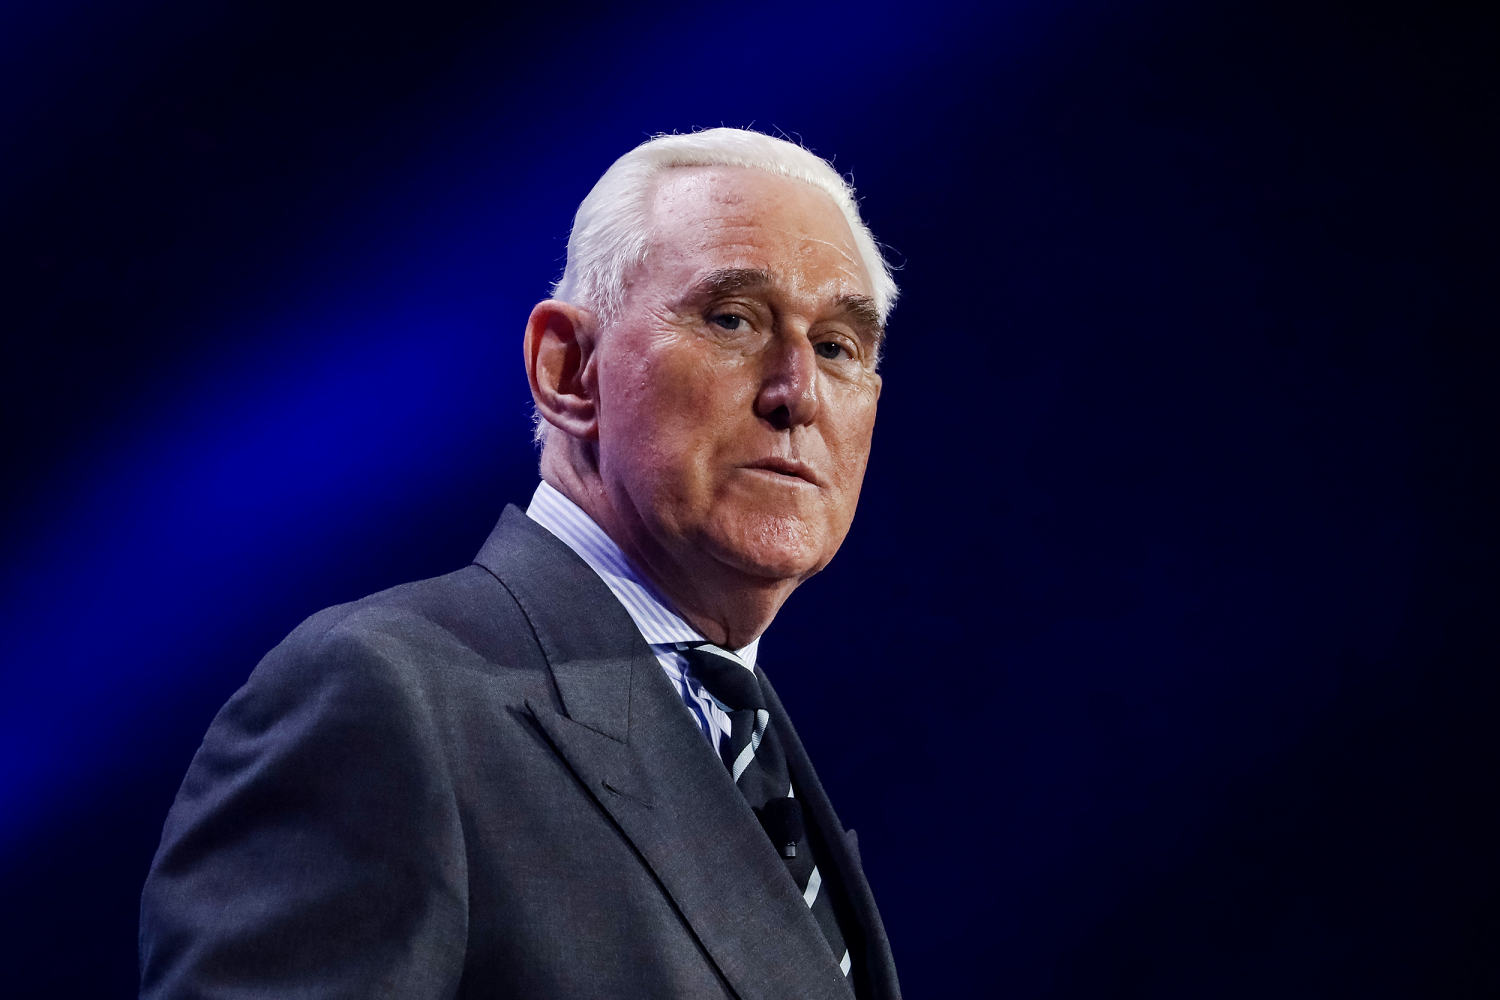 Why the DOJ’s handling of Roger Stone’s case got another look